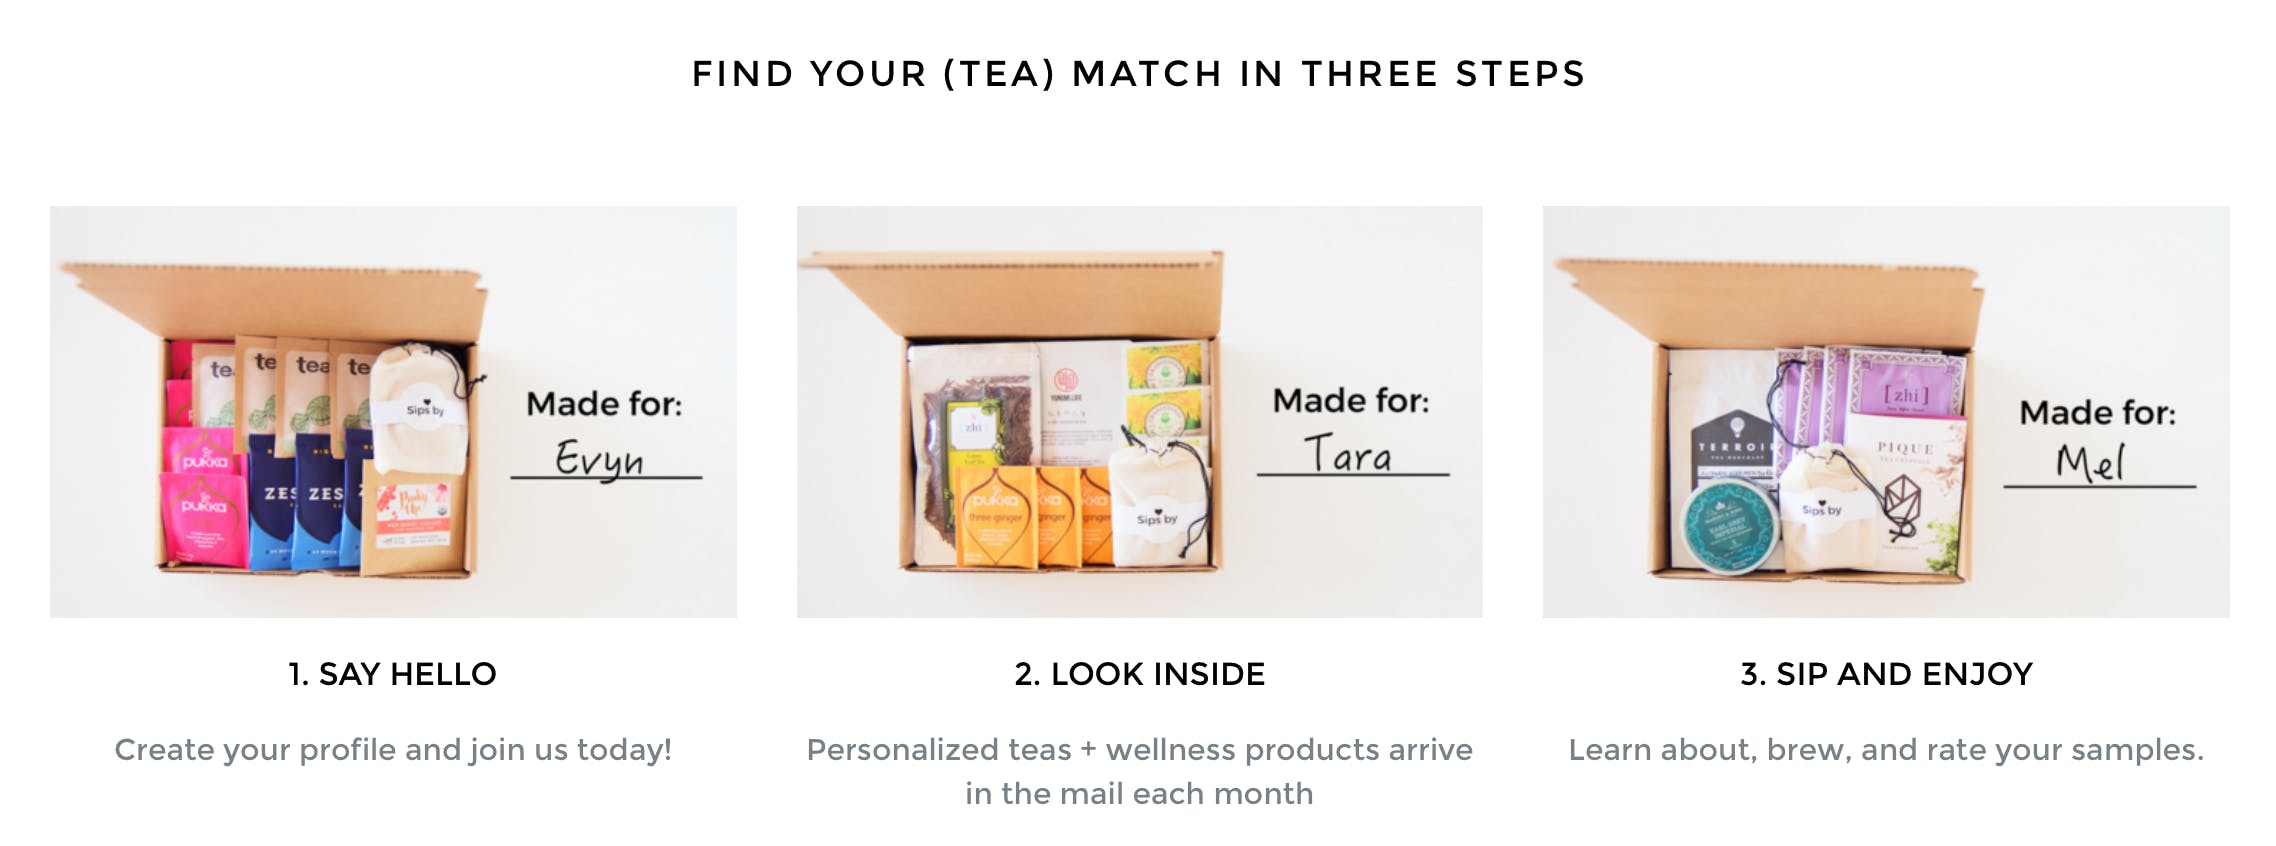 Sips by - Personalized Tea Discovery Box media 3